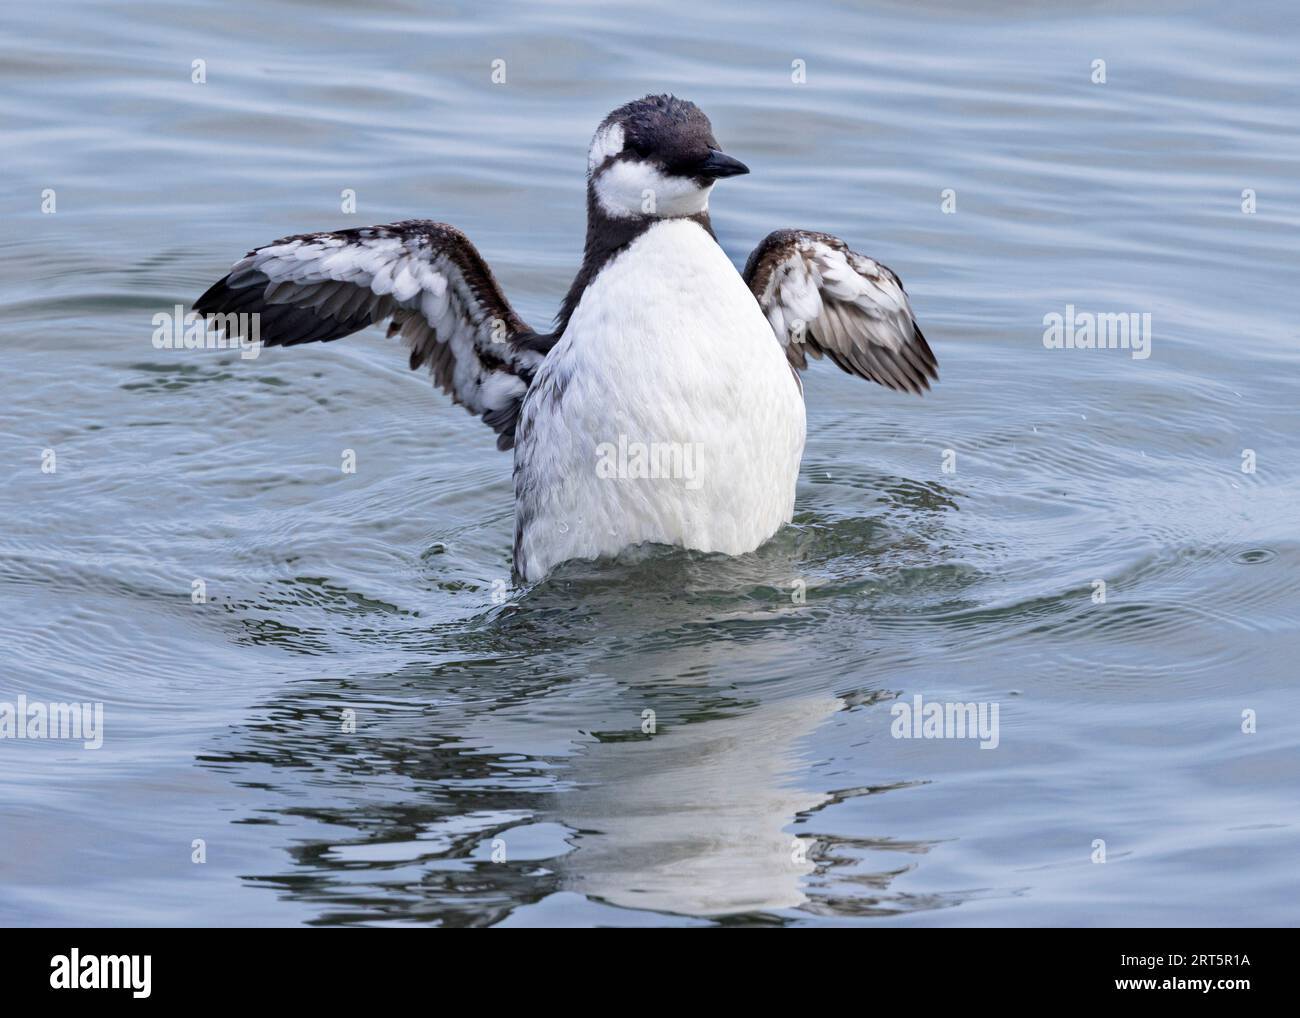 An adult Common Guillemot vigorously flaps its wings after preening. They often fish inshore, especially when following shoals of sand eels. Stock Photo